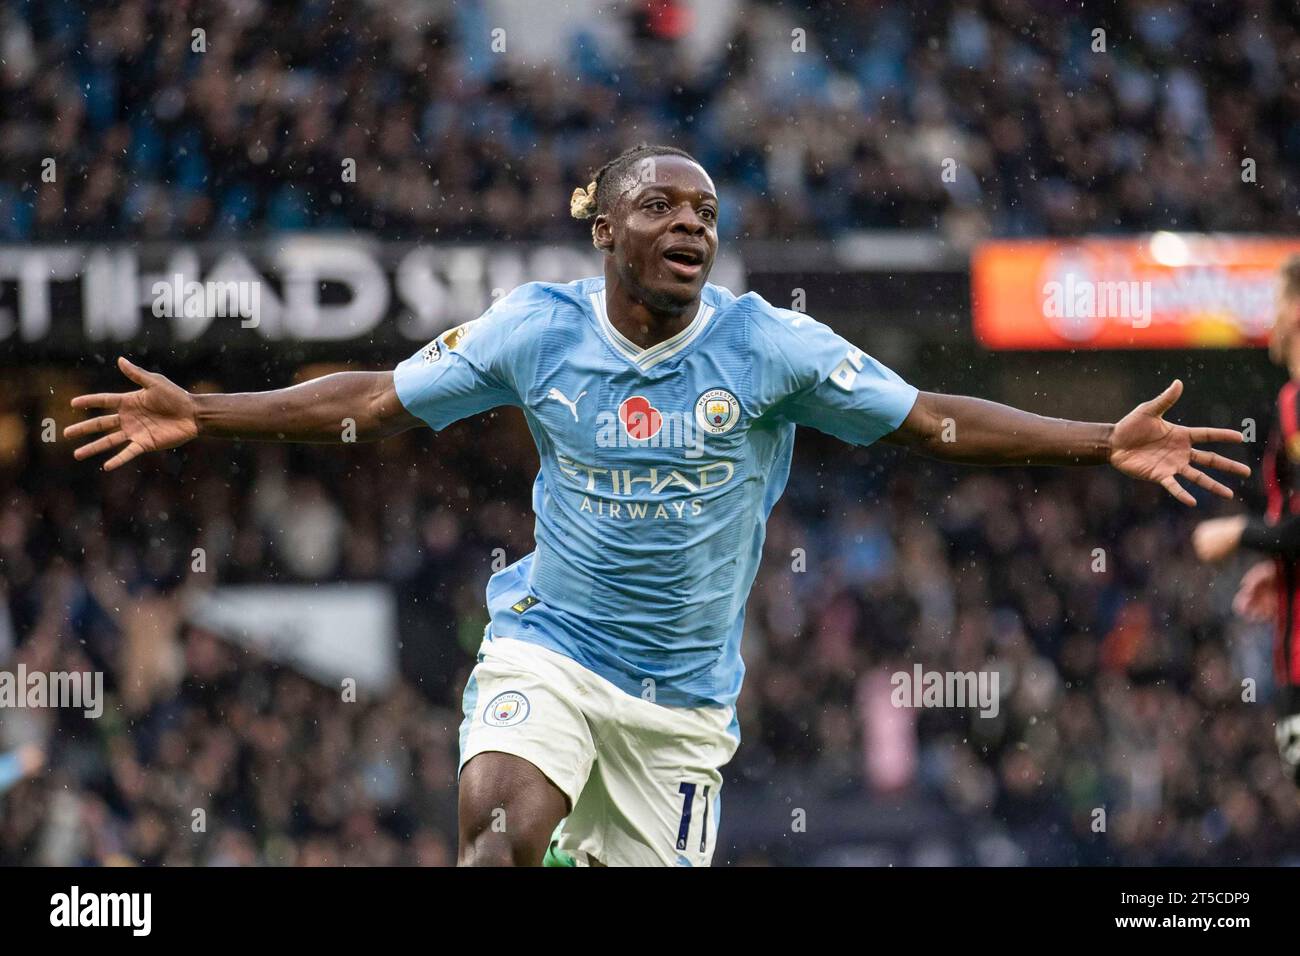 Manchester on Saturday 4th November 2023. Jérémy Doku #11 of Manchester City celebrates his goal during the Premier League match between Manchester City and Bournemouth at the Etihad Stadium, Manchester on Saturday 4th November 2023. (Photo: Mike Morese | MI News) Credit: MI News & Sport /Alamy Live News Stock Photo